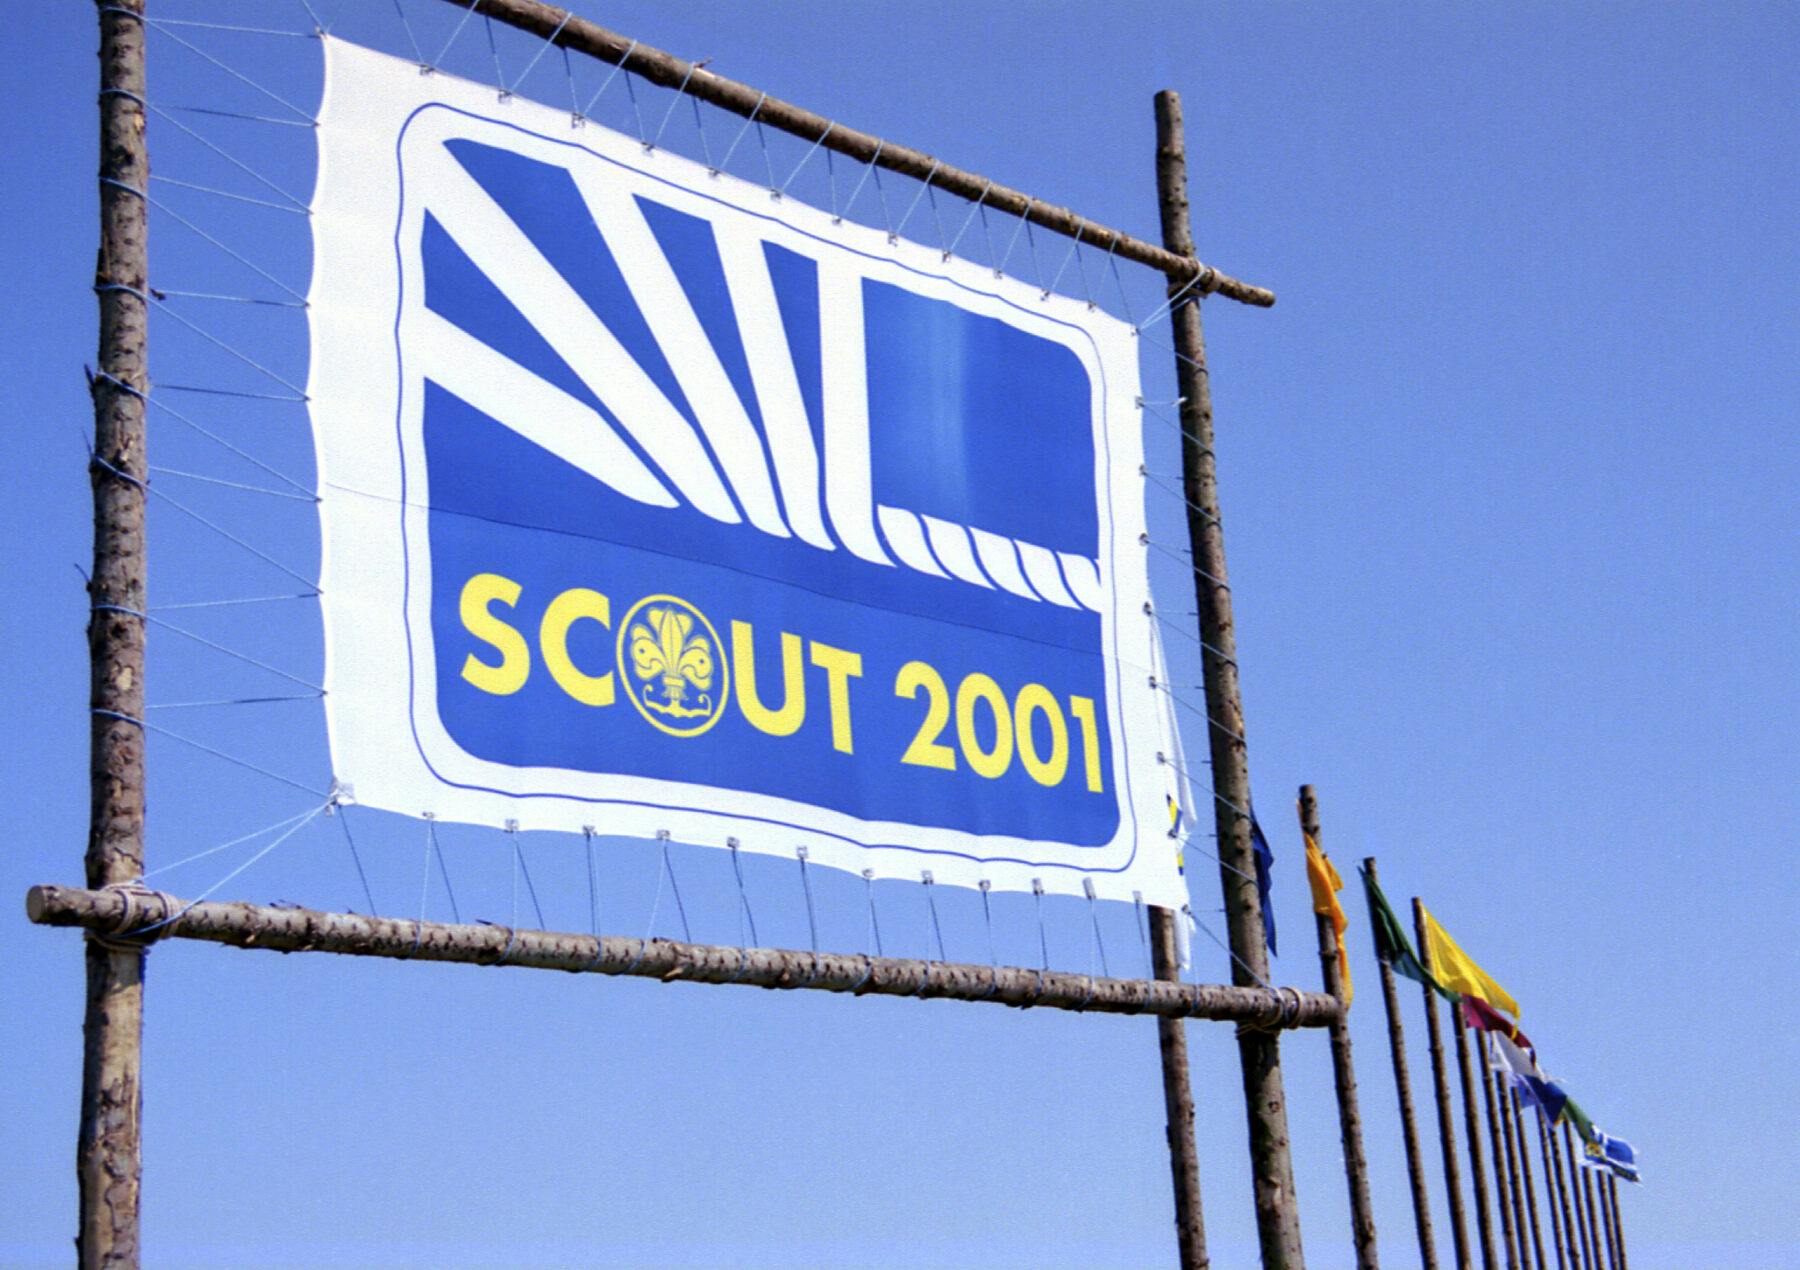 Scout 2001